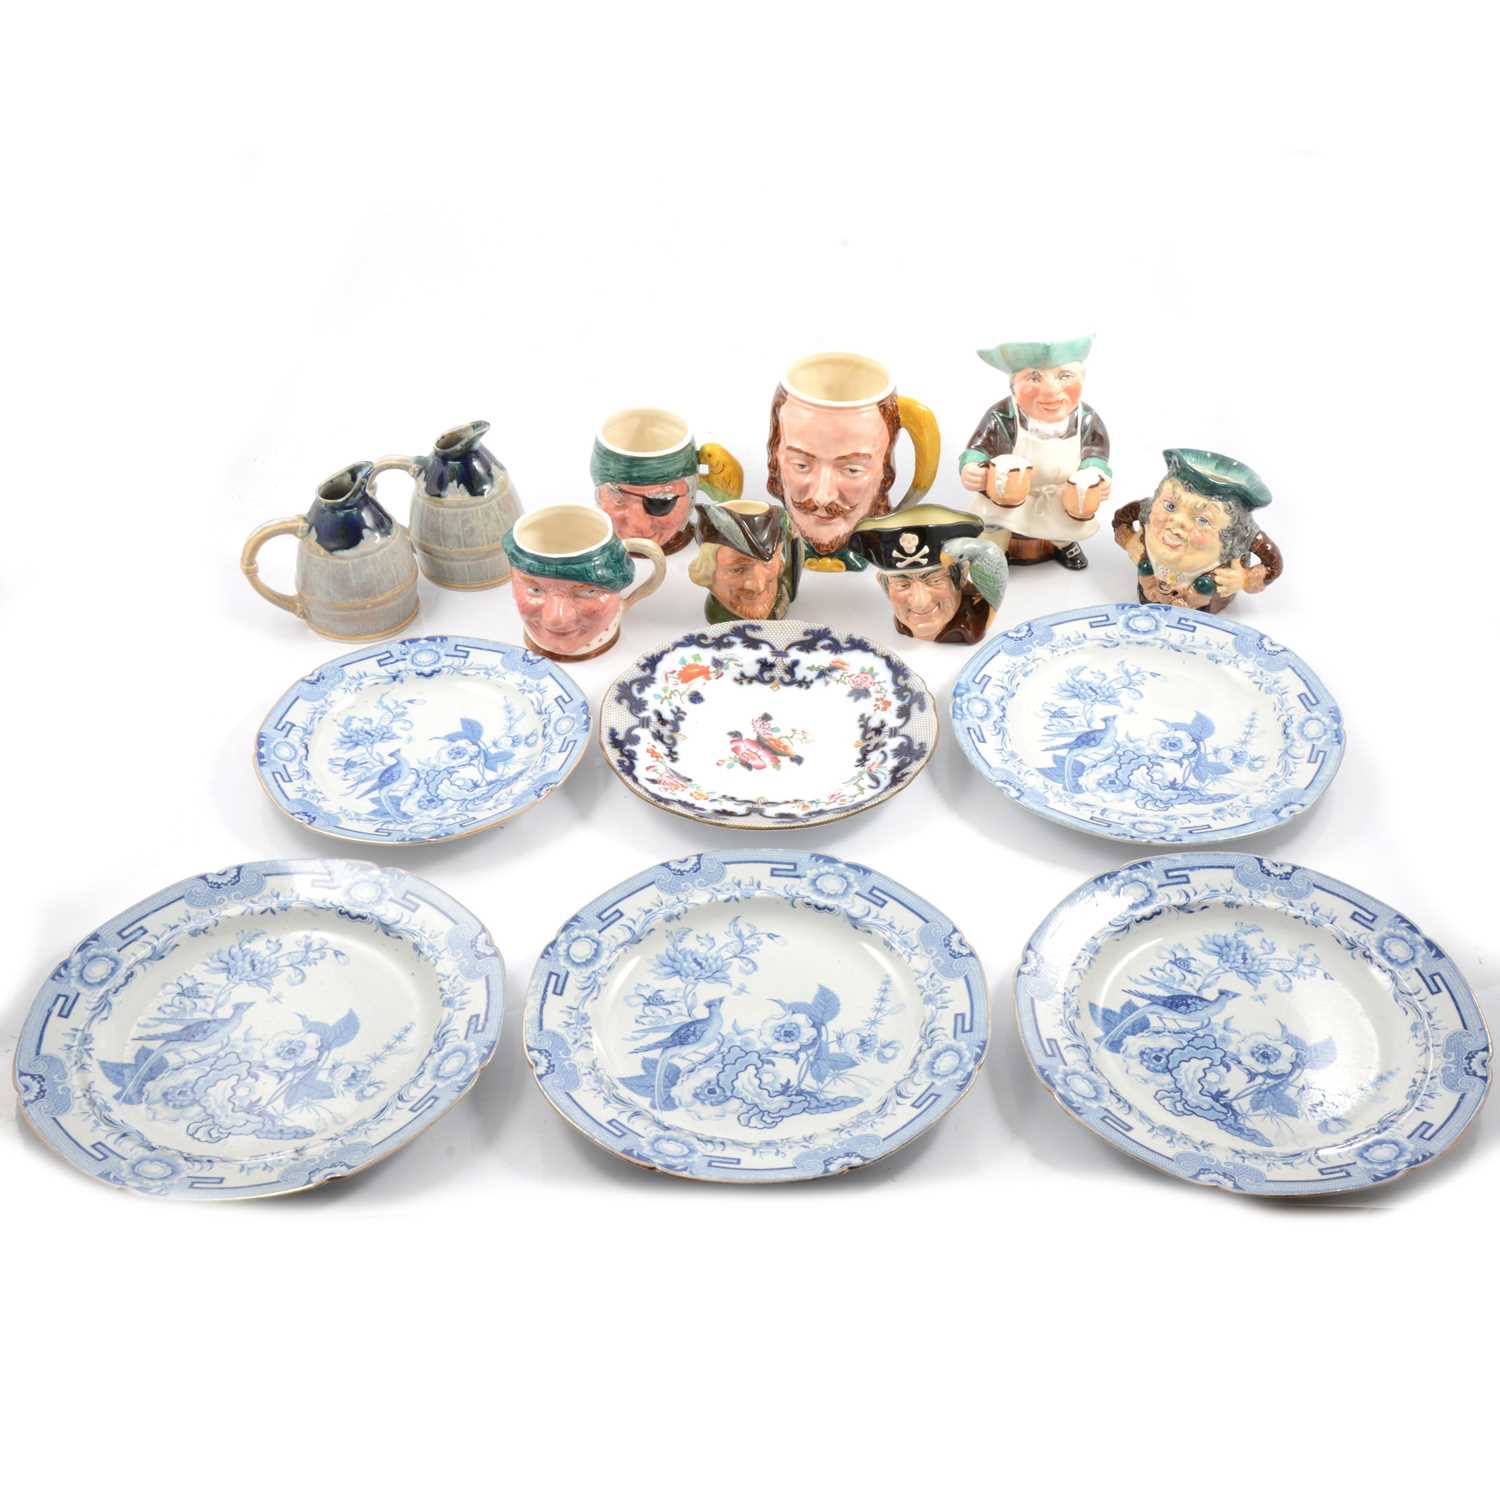 Lot 39 - Collection of Toby jugs and plates